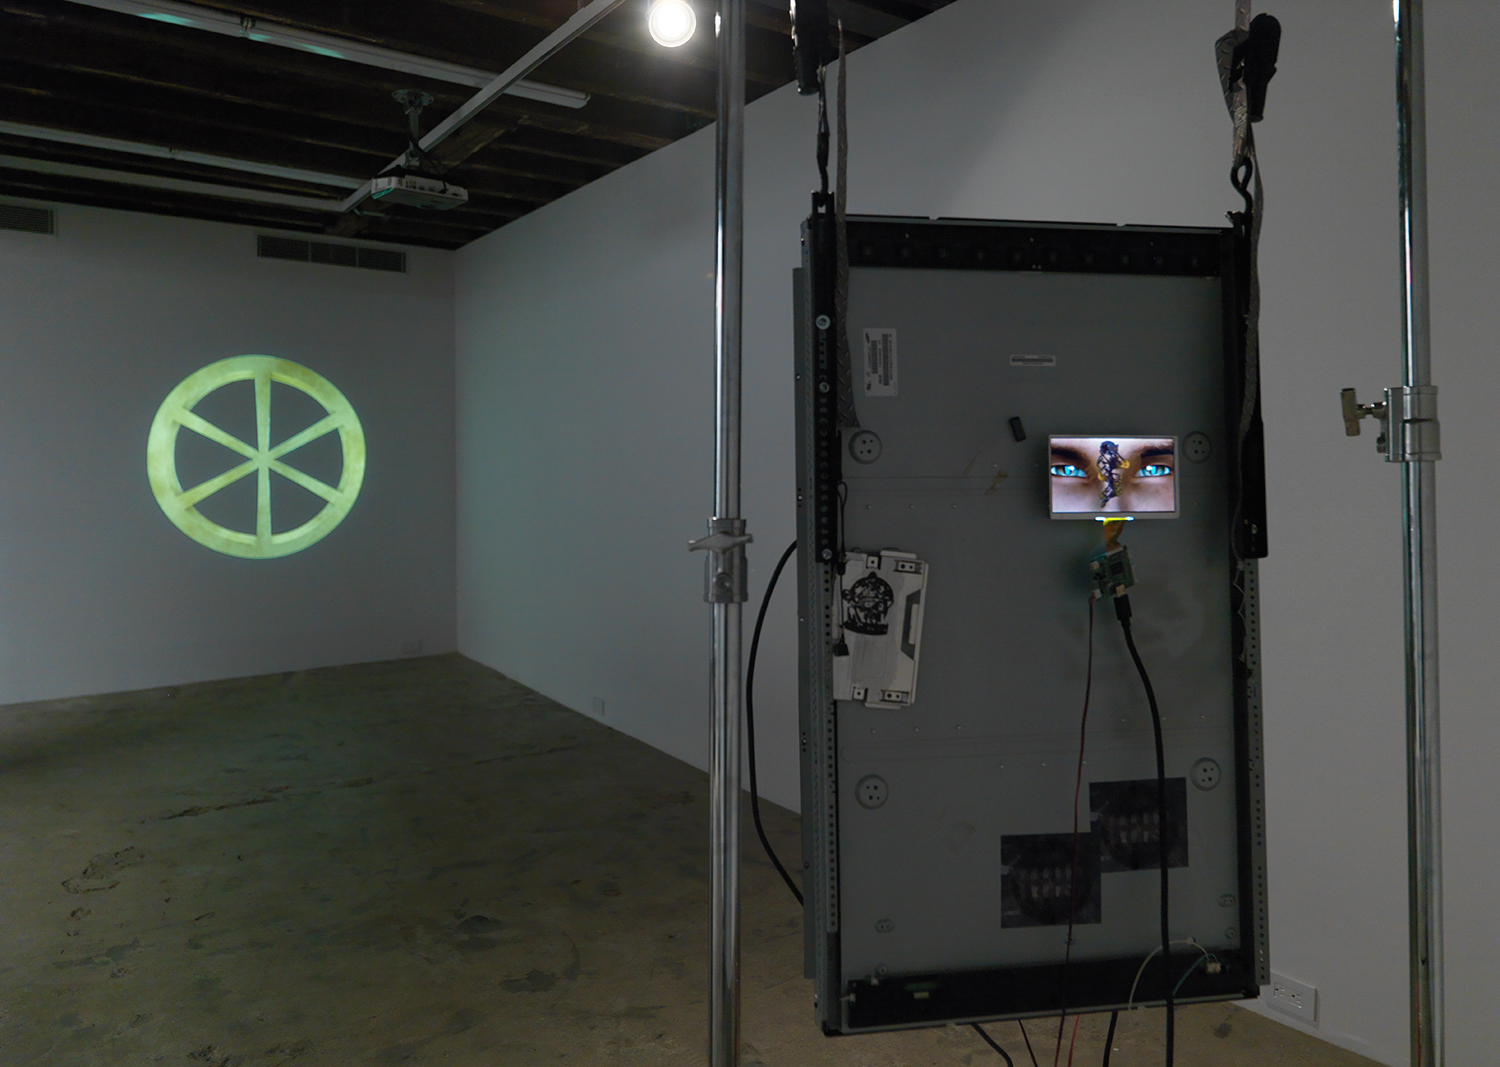 Theodore Darst, And How To Find The Real One (Alternate installation view), 2017, acrylic on Panasonic HD Monitor, Vinyl Sticker, 3 HD Video Loops, C Stand, Sandbags, dimensions variable; Theodore Darst, WROL (Got The Life), 2017, single channel HD video projection, 2:47 minutes, dimensions variable. Edition of 3 + 2 Artist Proofs